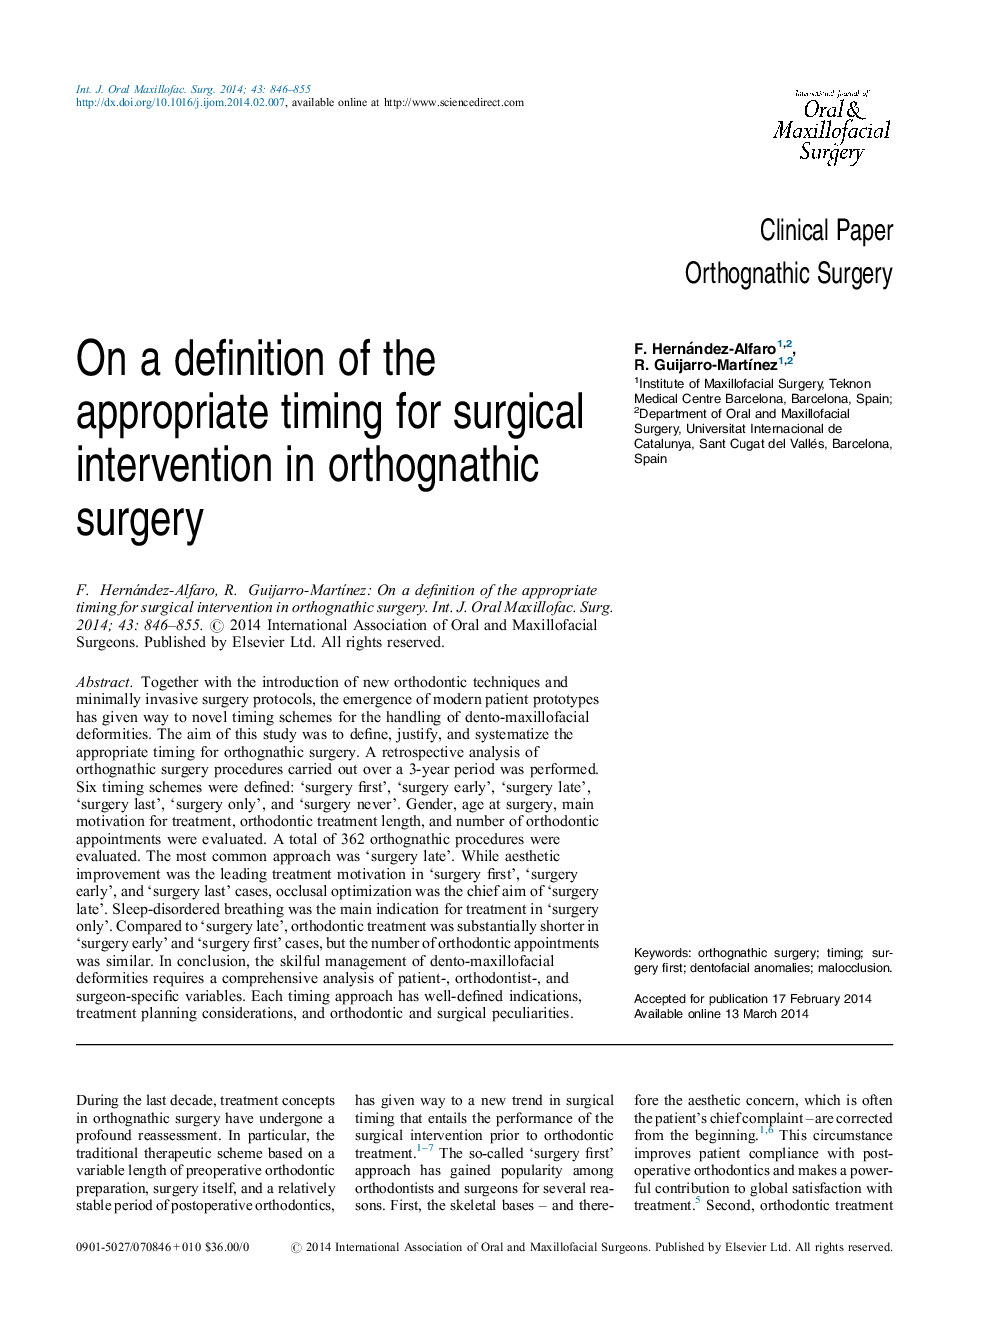 On a definition of the appropriate timing for surgical intervention in orthognathic surgery